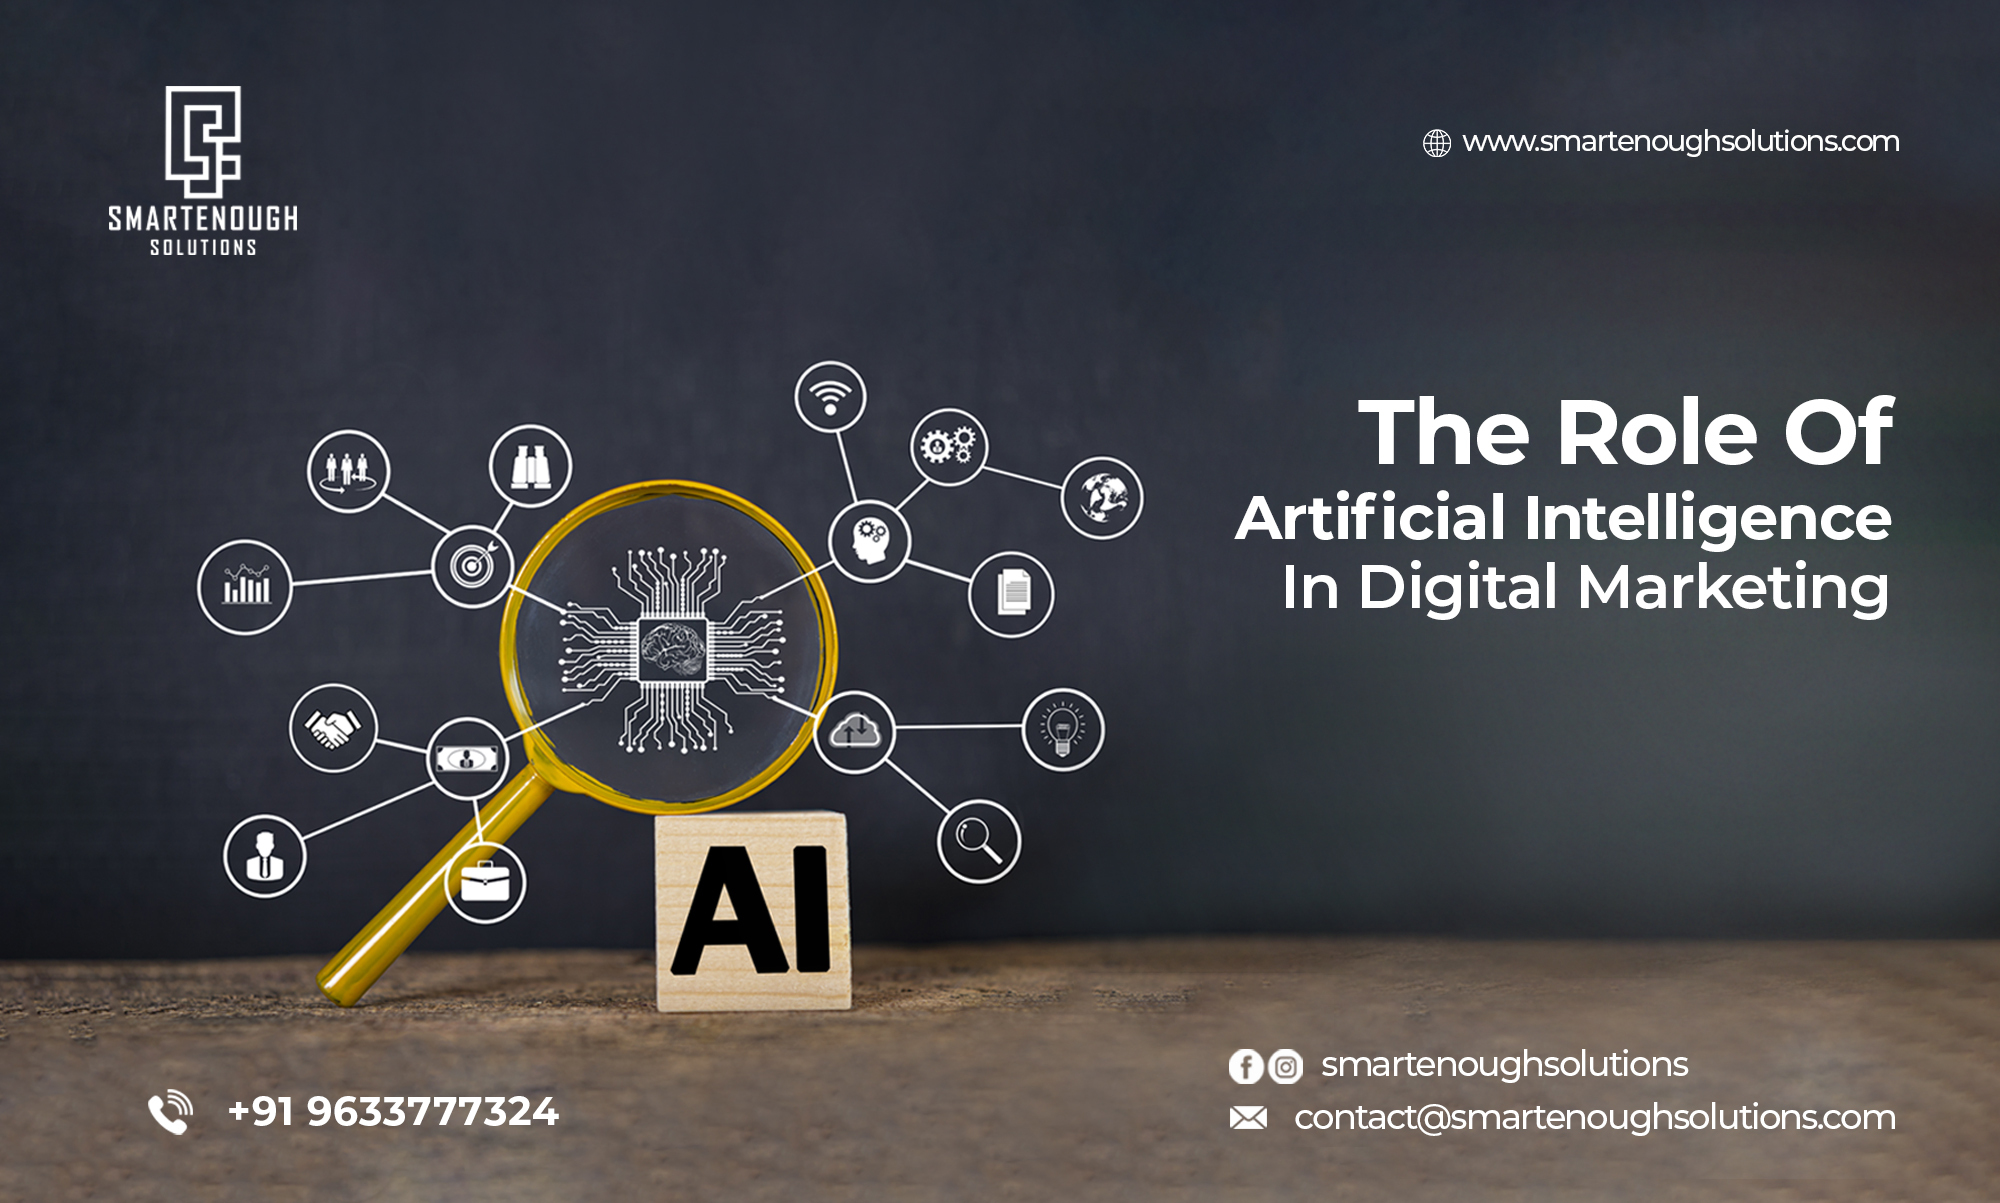 THE ROLE OF ARTIFICIAL INTELLIGENCE IN DIGITAL MARKETING